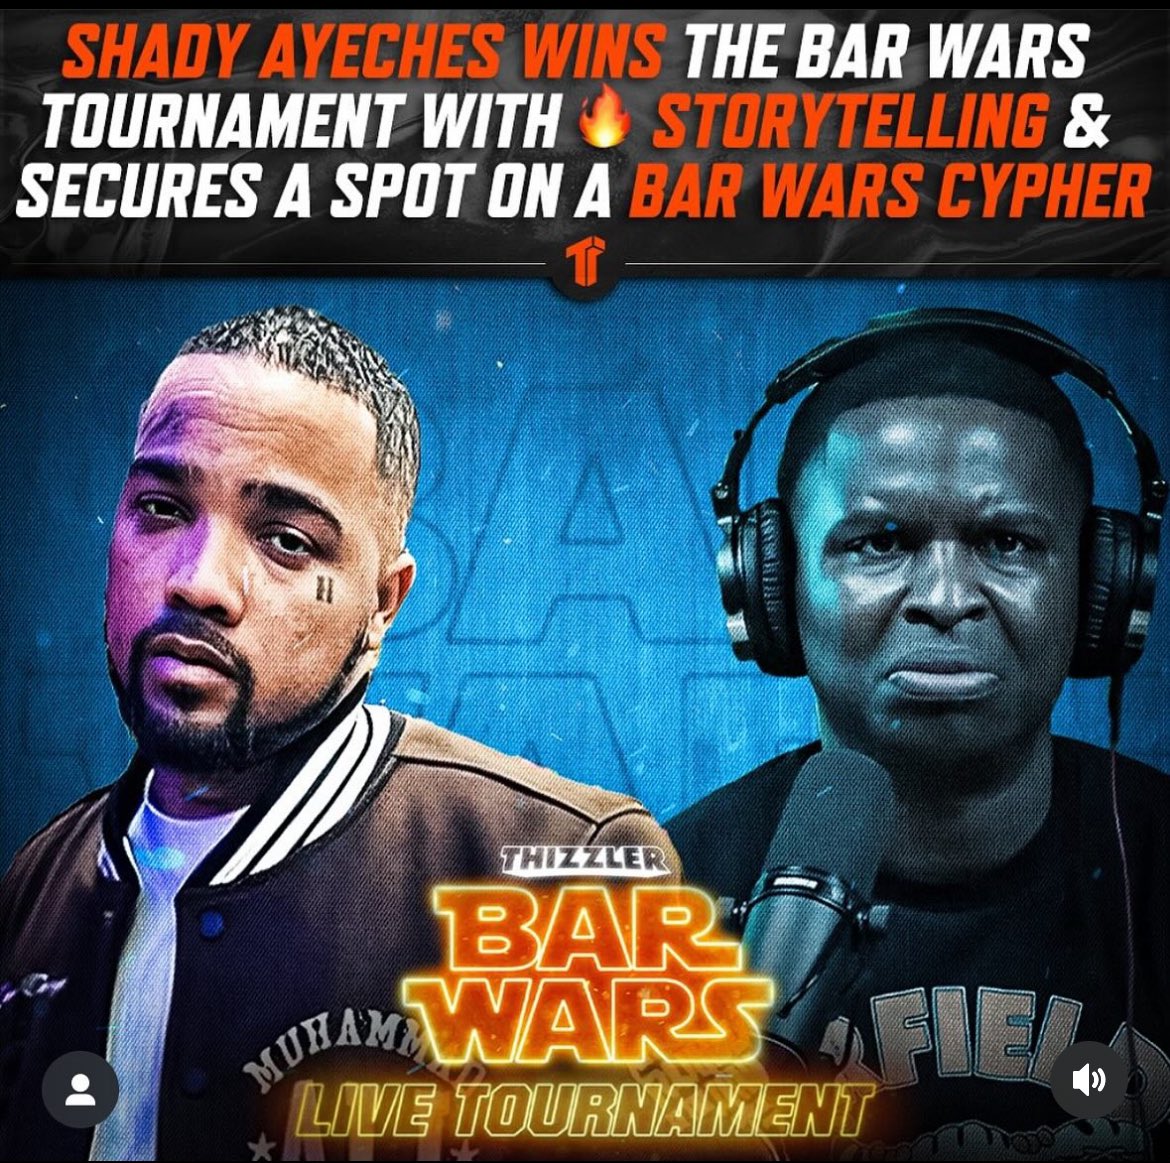 #shadyayeches wins the bar war tournament. Secures a spot on a #barwarscypher on #thizzler #Fresno #BangWest